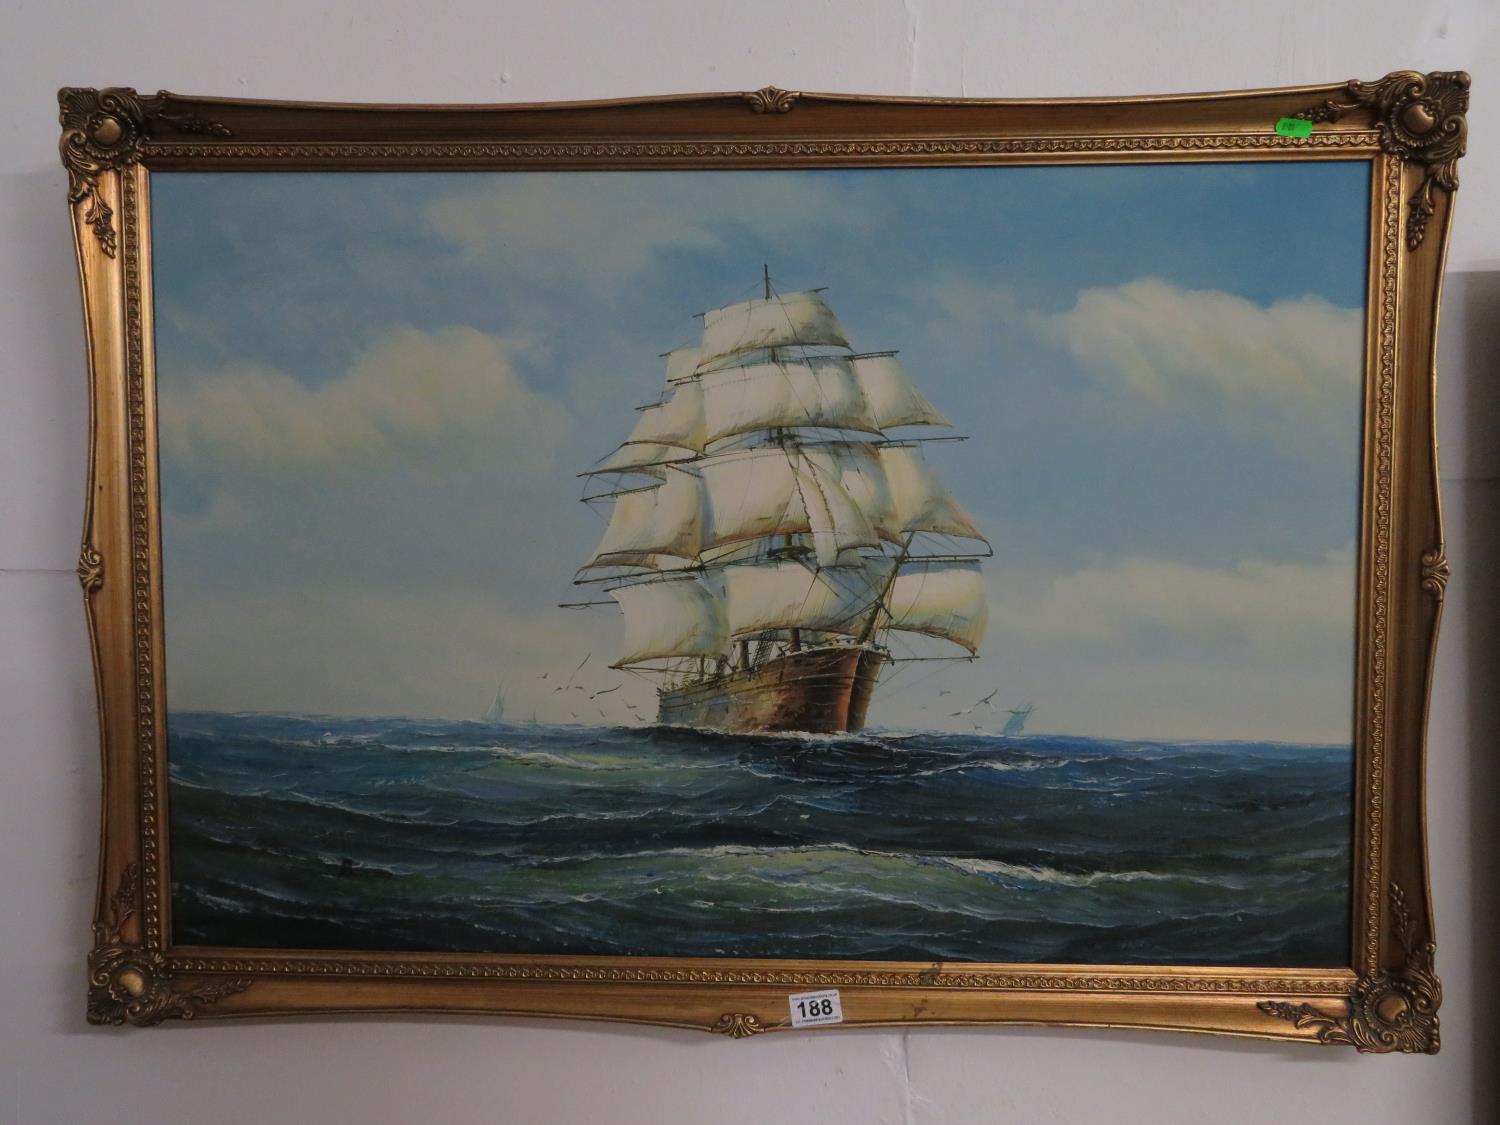 3' x 2' oil on canvas maritime picture